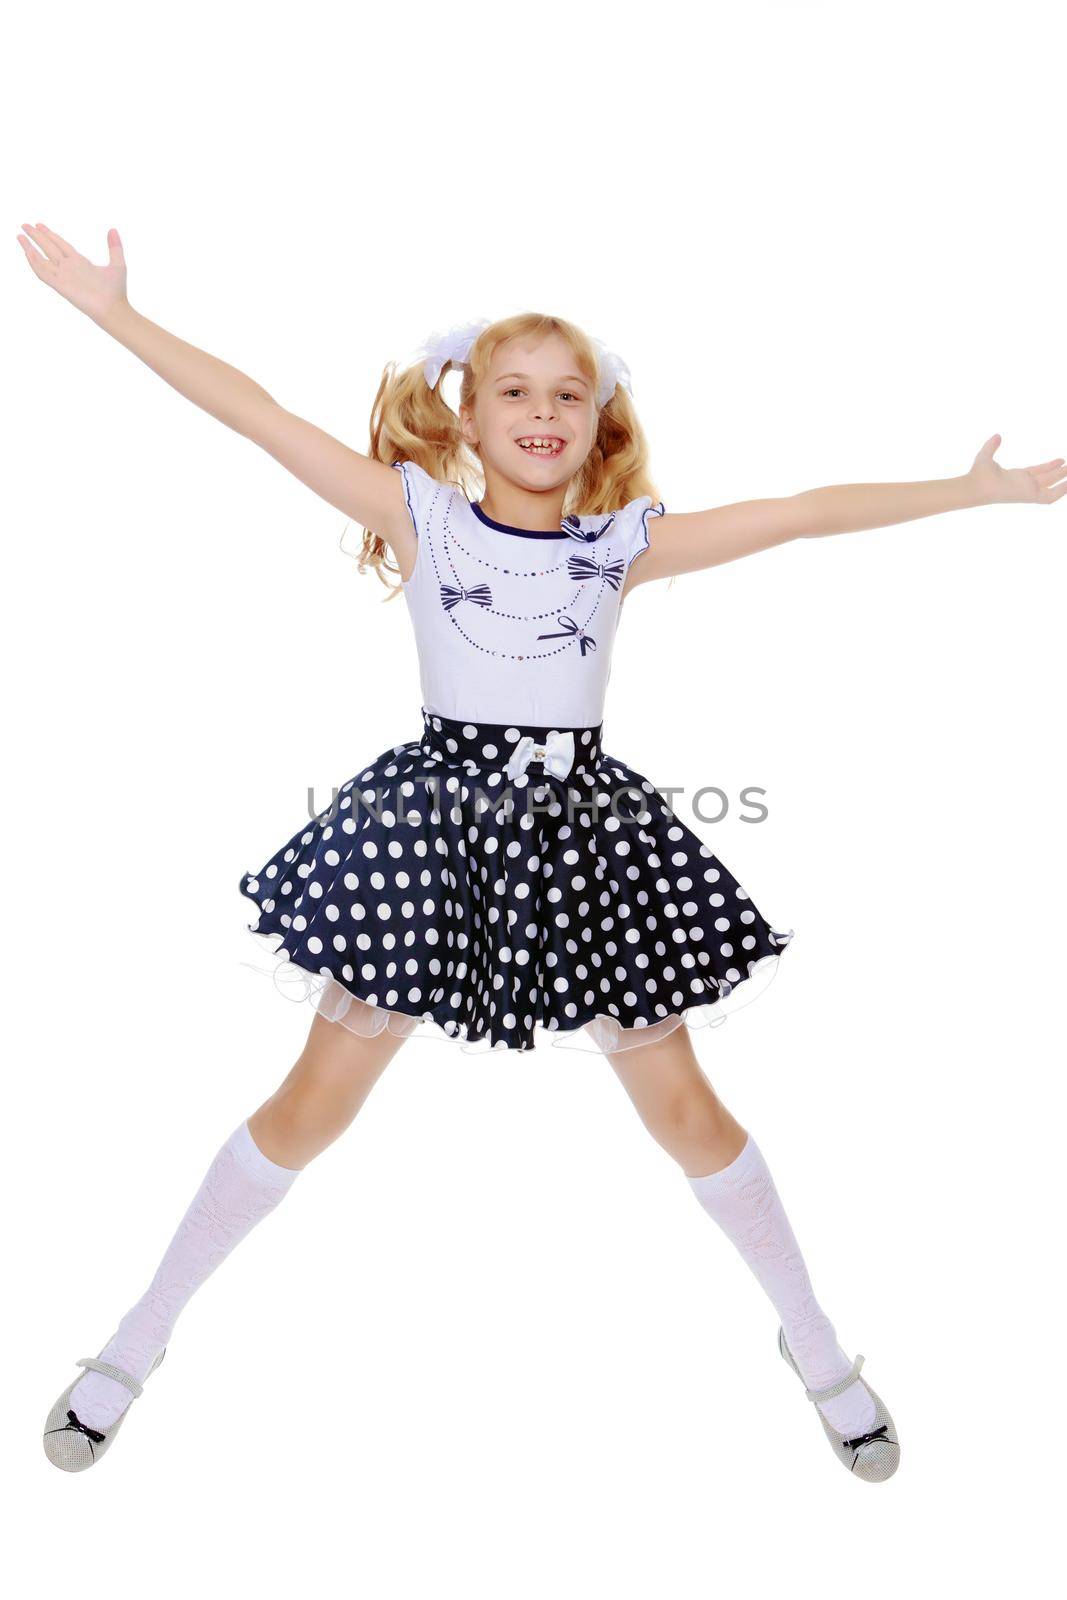 Happy little girl in the short polka-dot dress jumps , spread wide his arms and legs-Isolated on white background